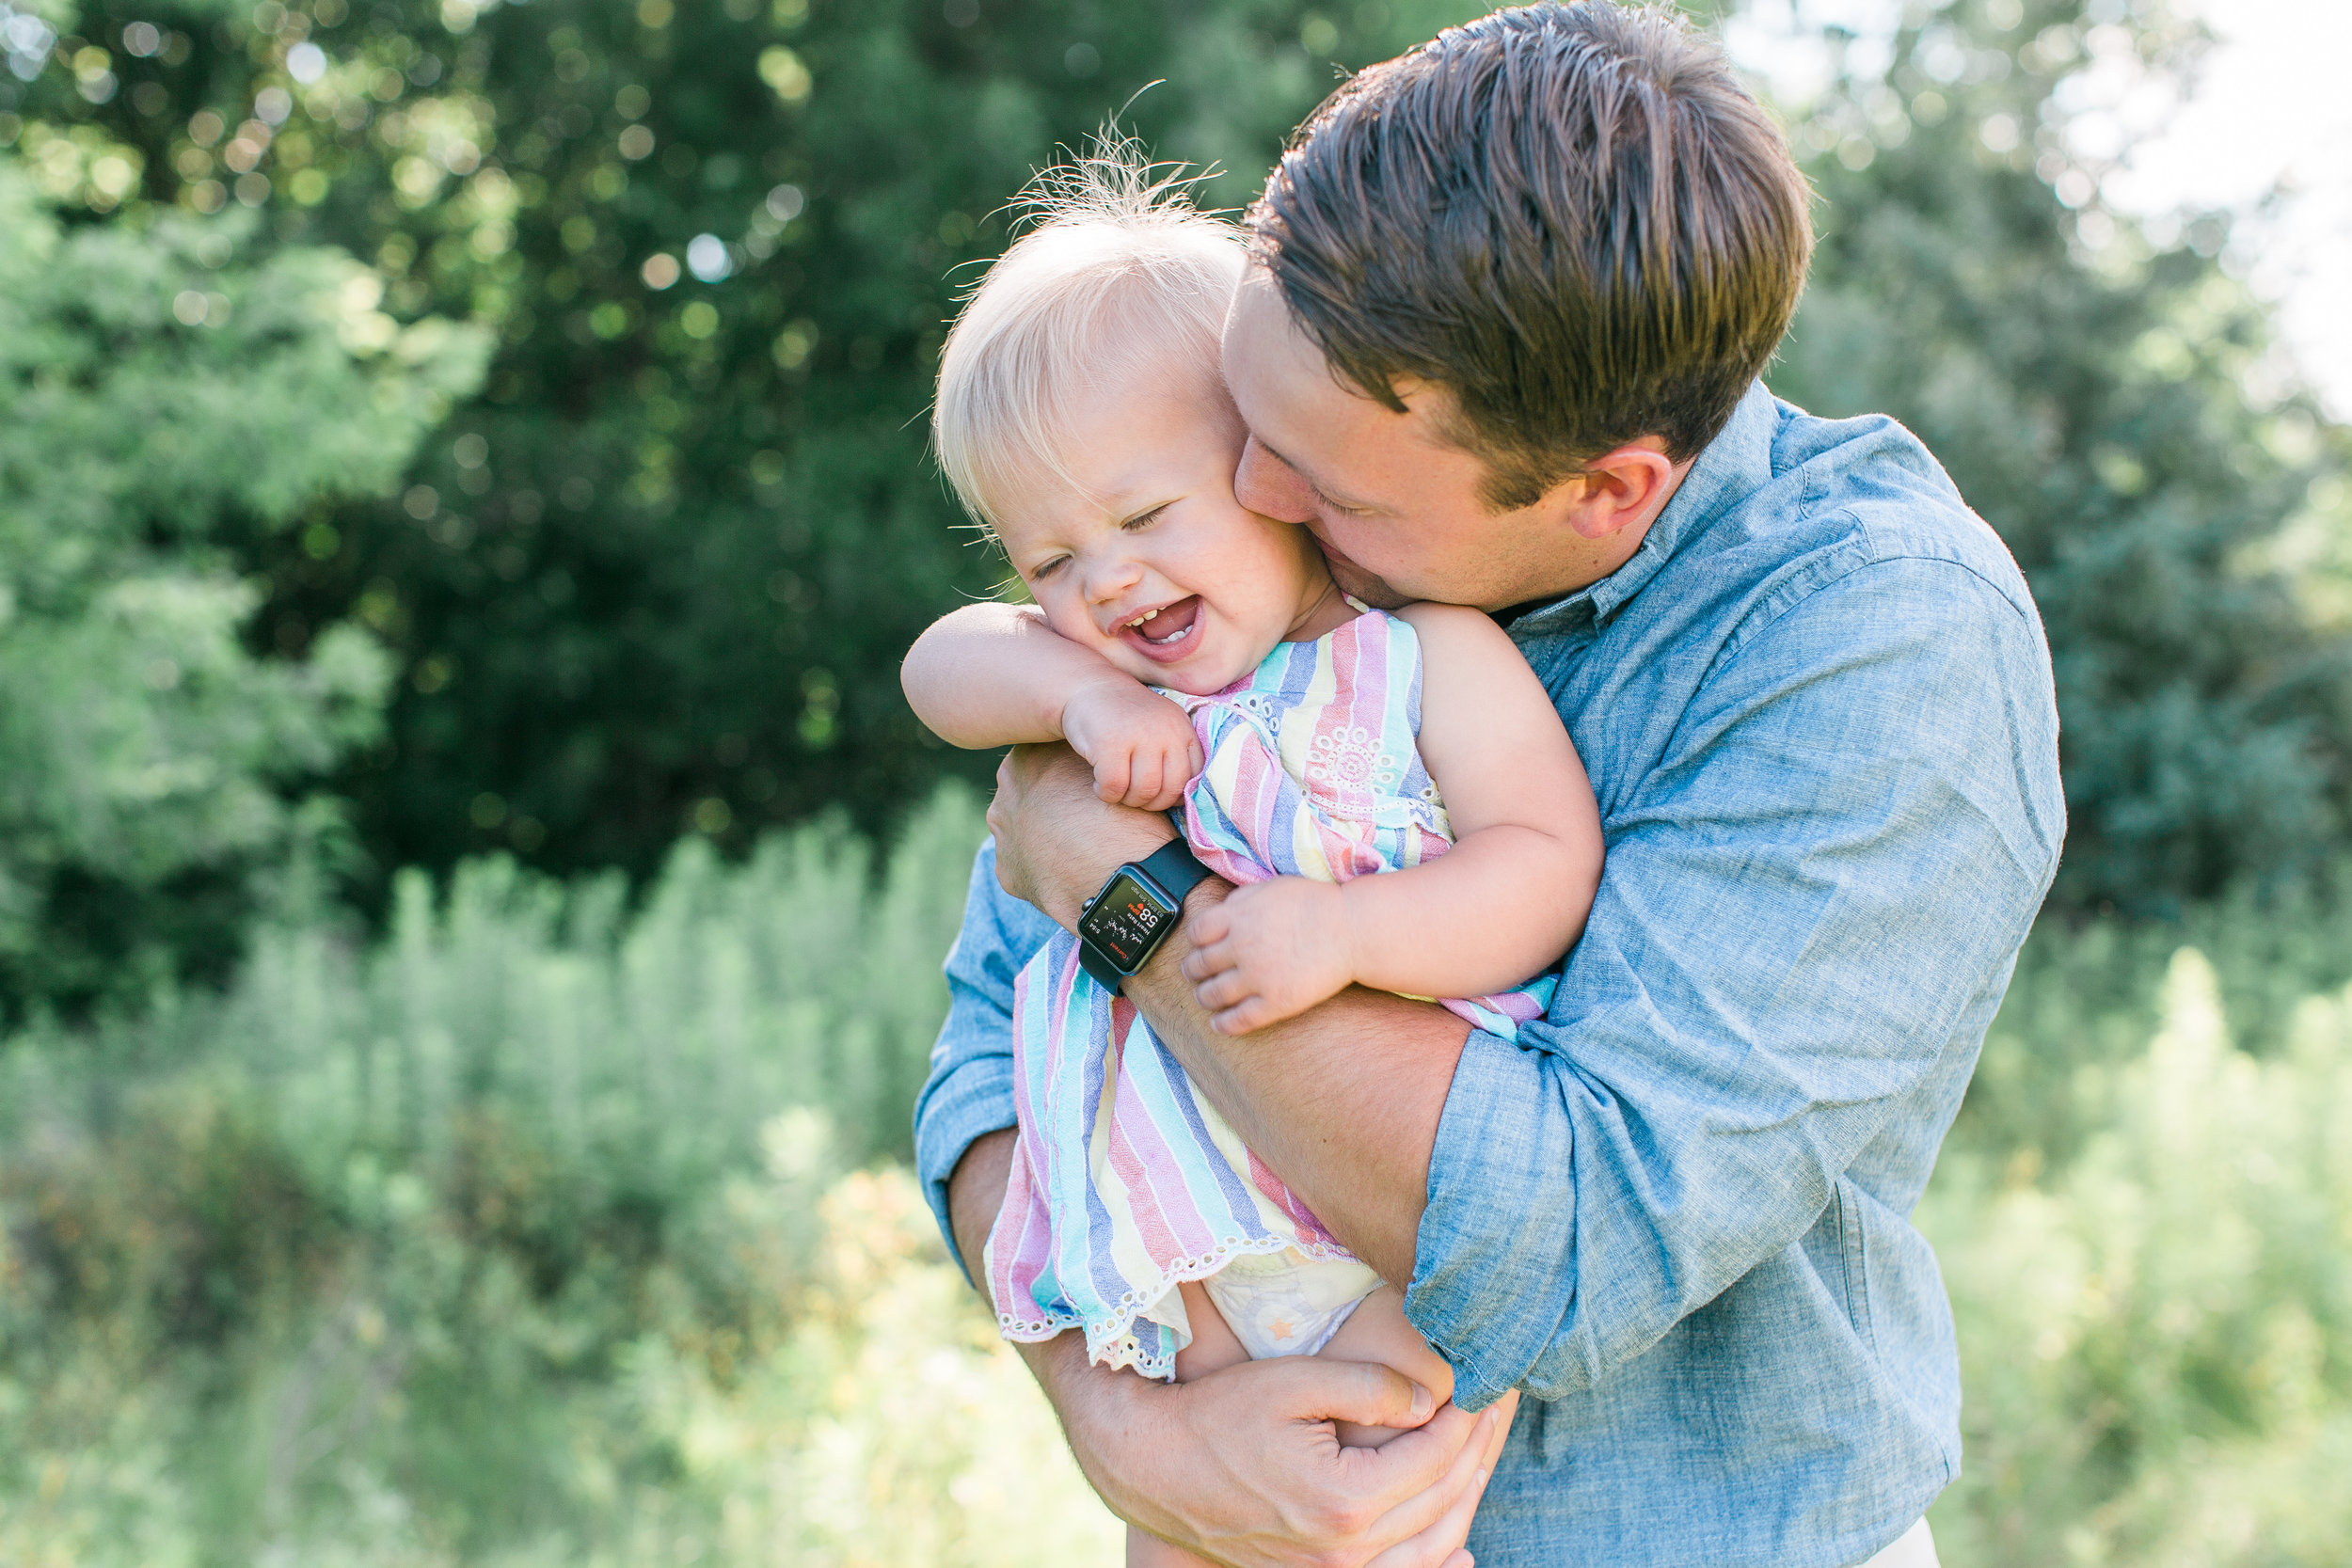 Dad cuddling and making baby laugh in rural field in Minnesota for family photos Minnesota family photographer Mallory Kiesow Photography